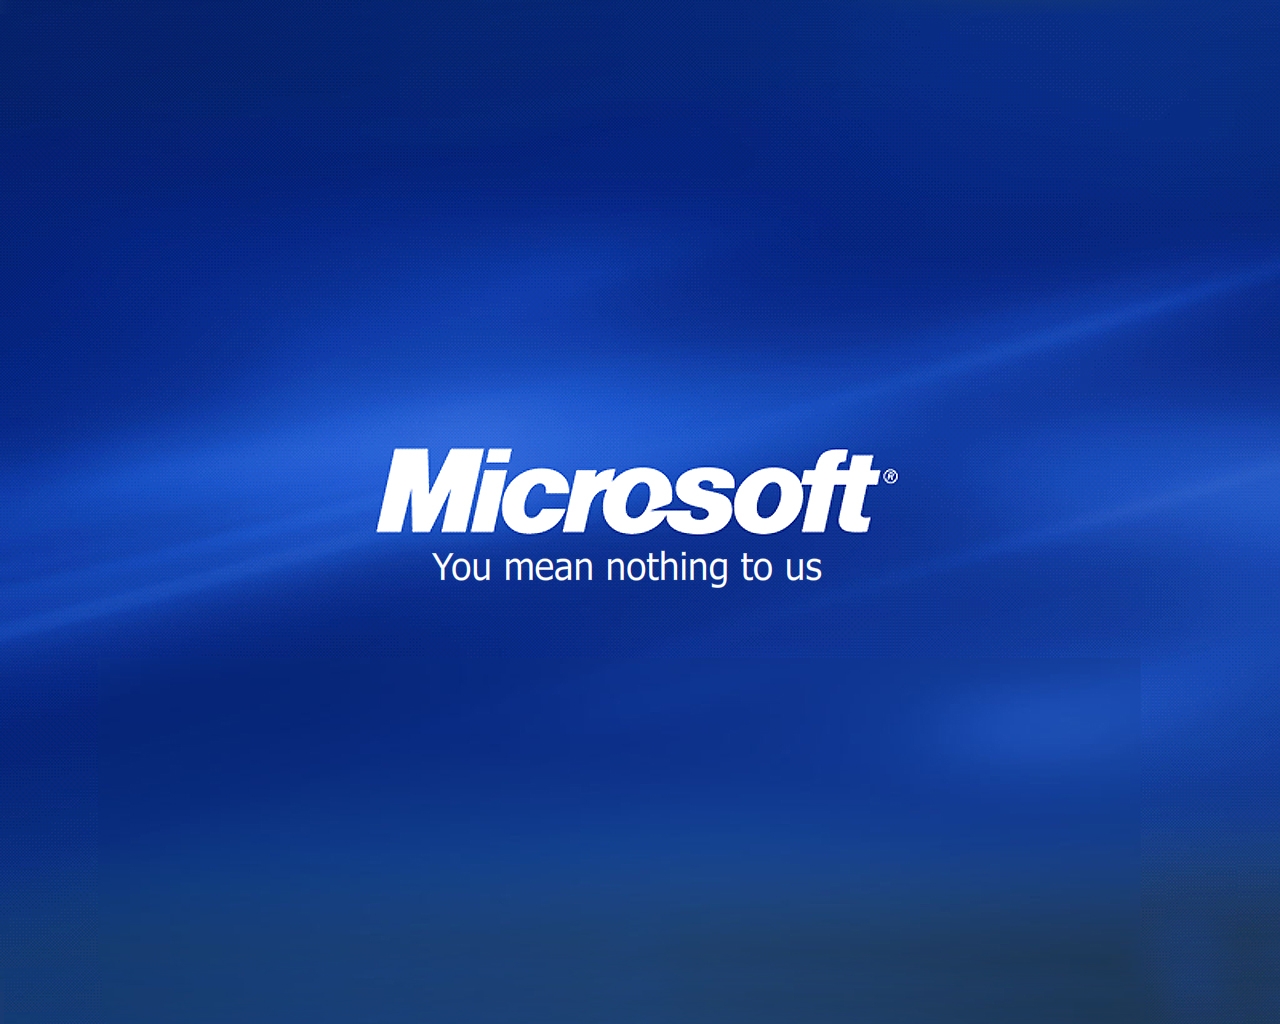 Image Microsoft Desktop Pc Android iPhone And iPad Wallpaper